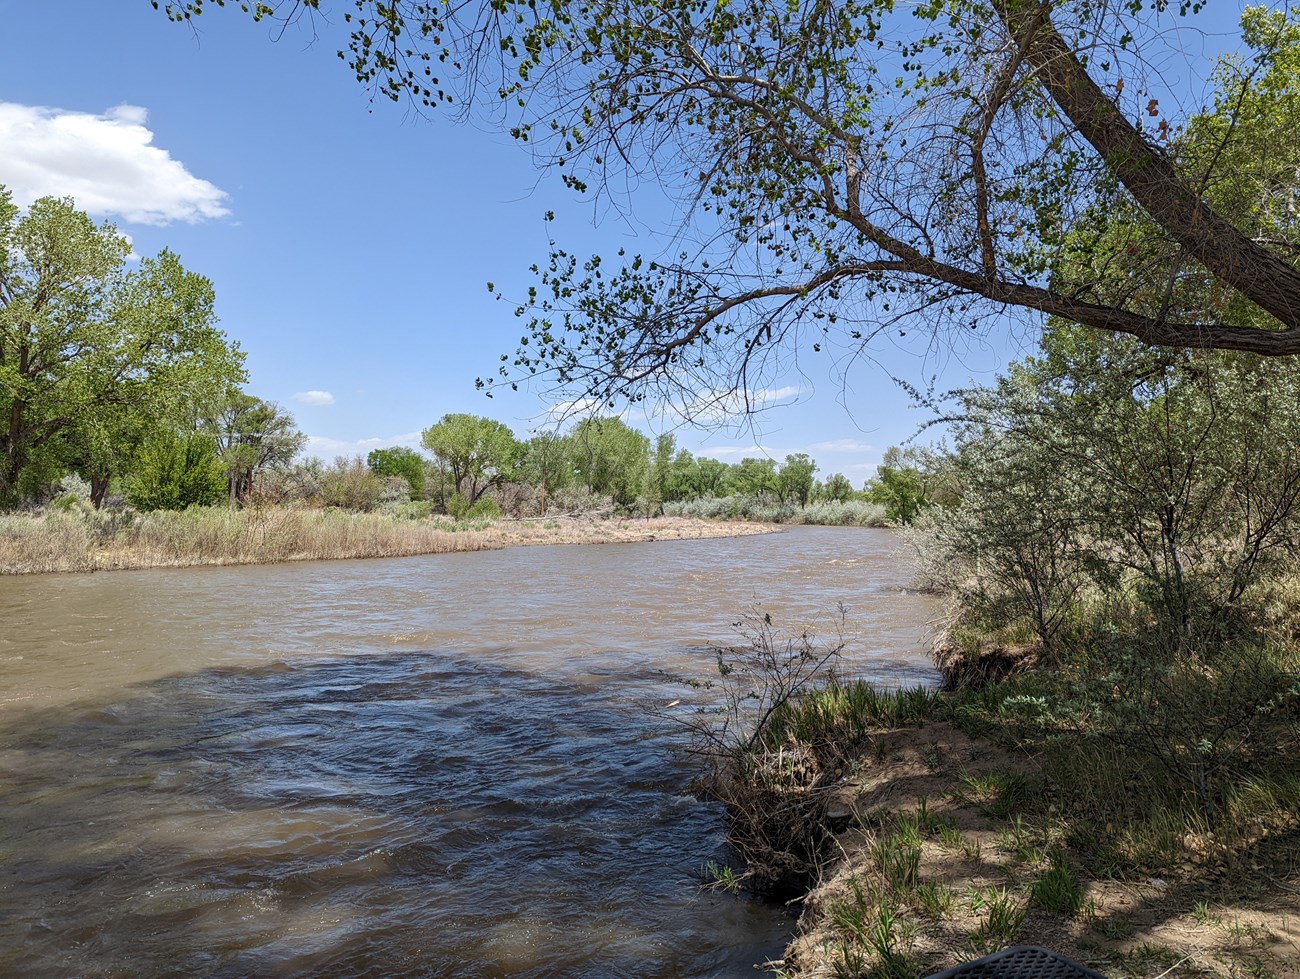 A view of the Animas River from near Aztec Ruins National Monument.